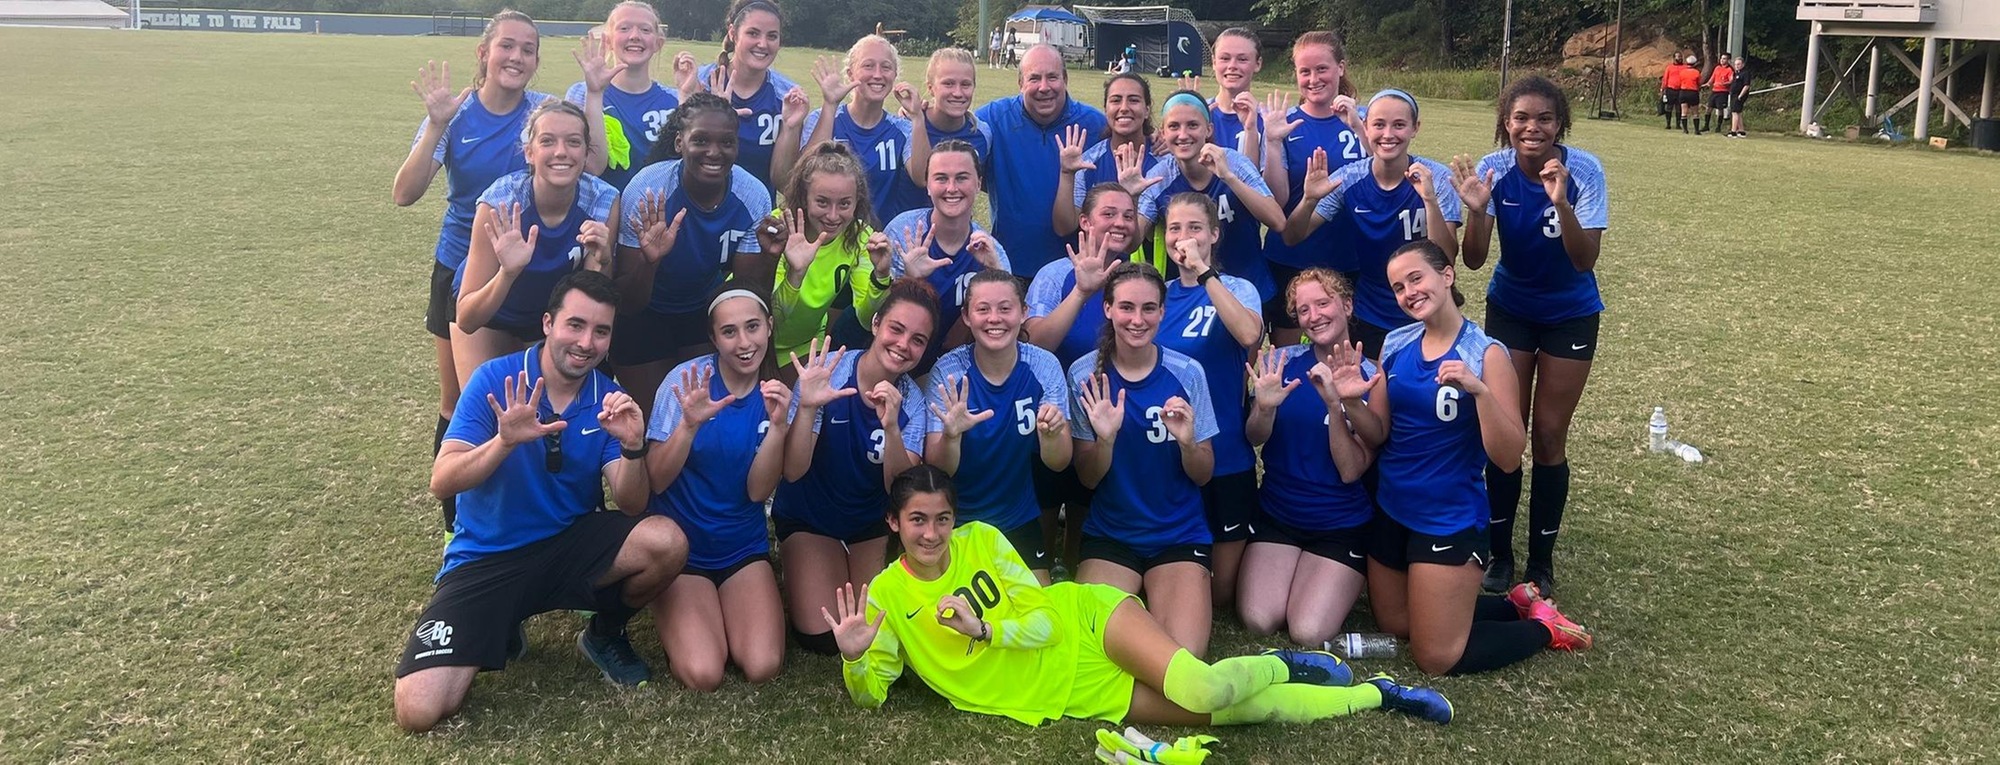 Brevard Routs Toccoa Falls; Mascaro Picks Up 50th Victory as Women’s Soccer Head Coach